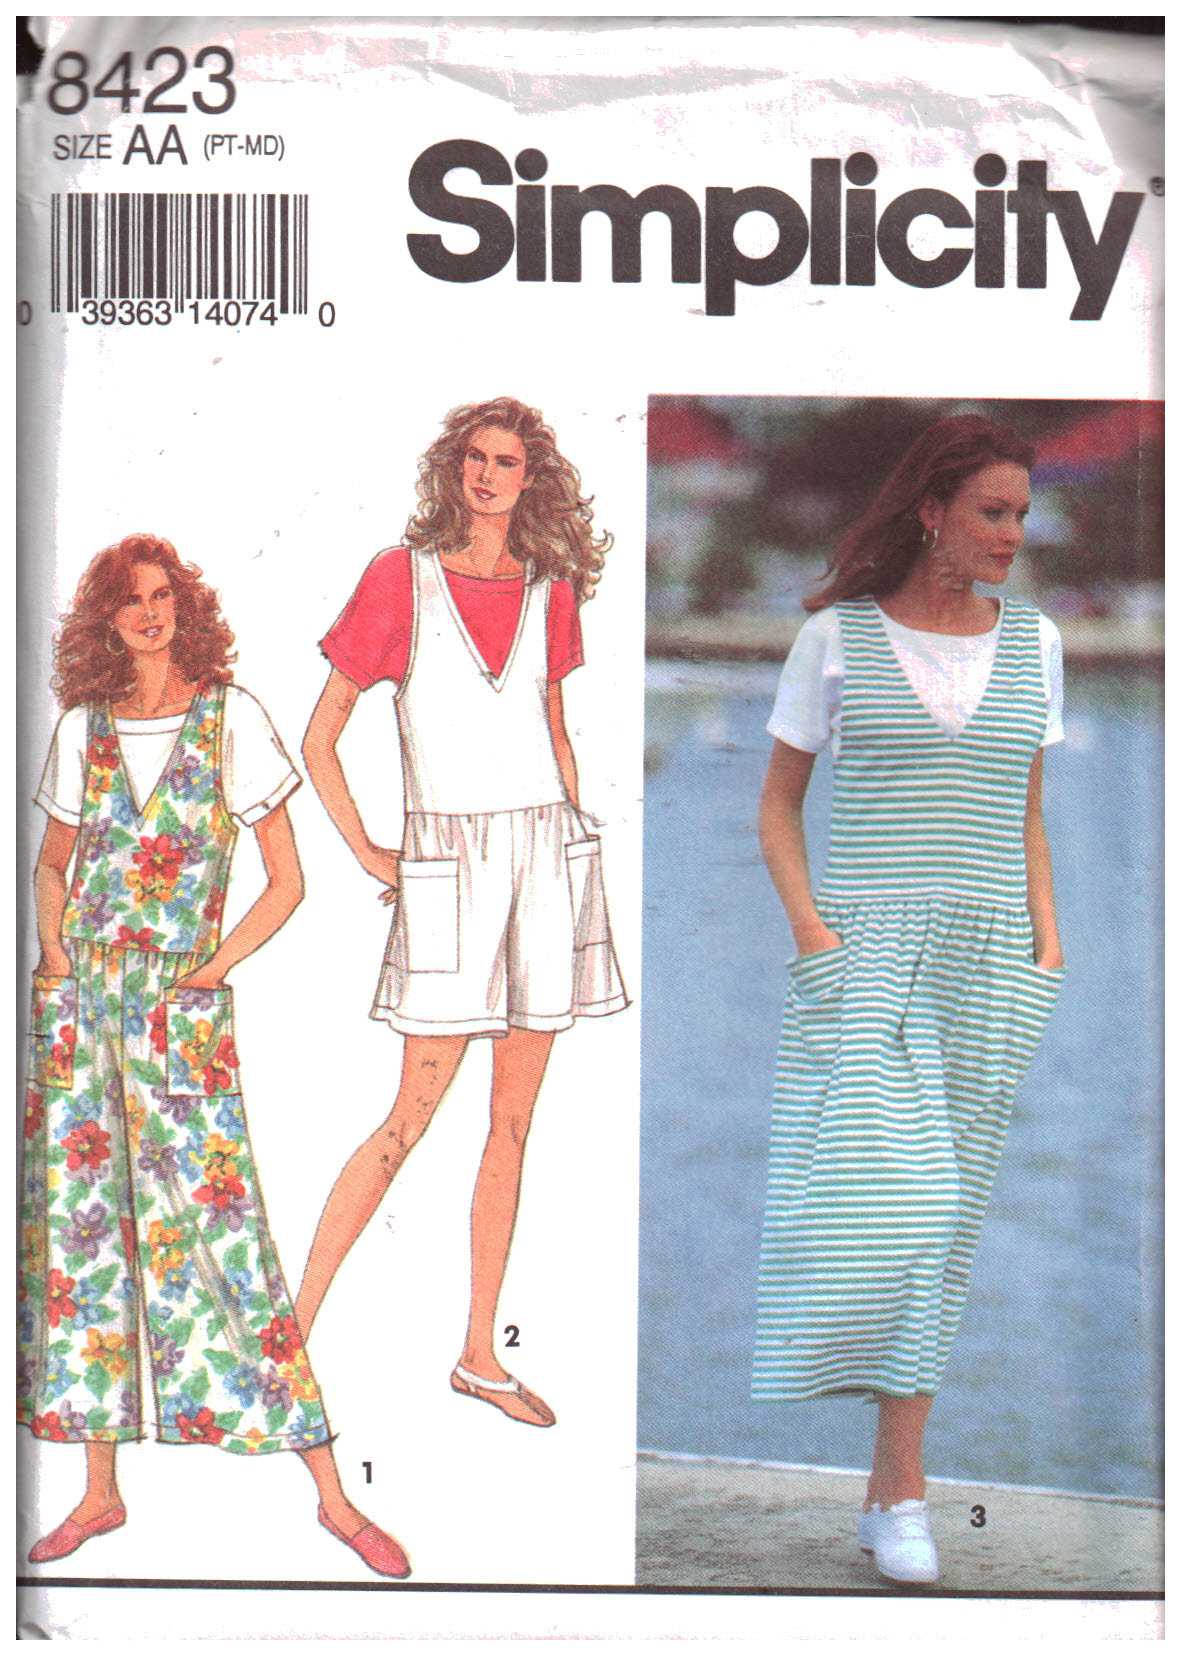 Simplicity 8423 Jumpsuit in two lengths, Jumper, Top Size: AA PT-MD or ...